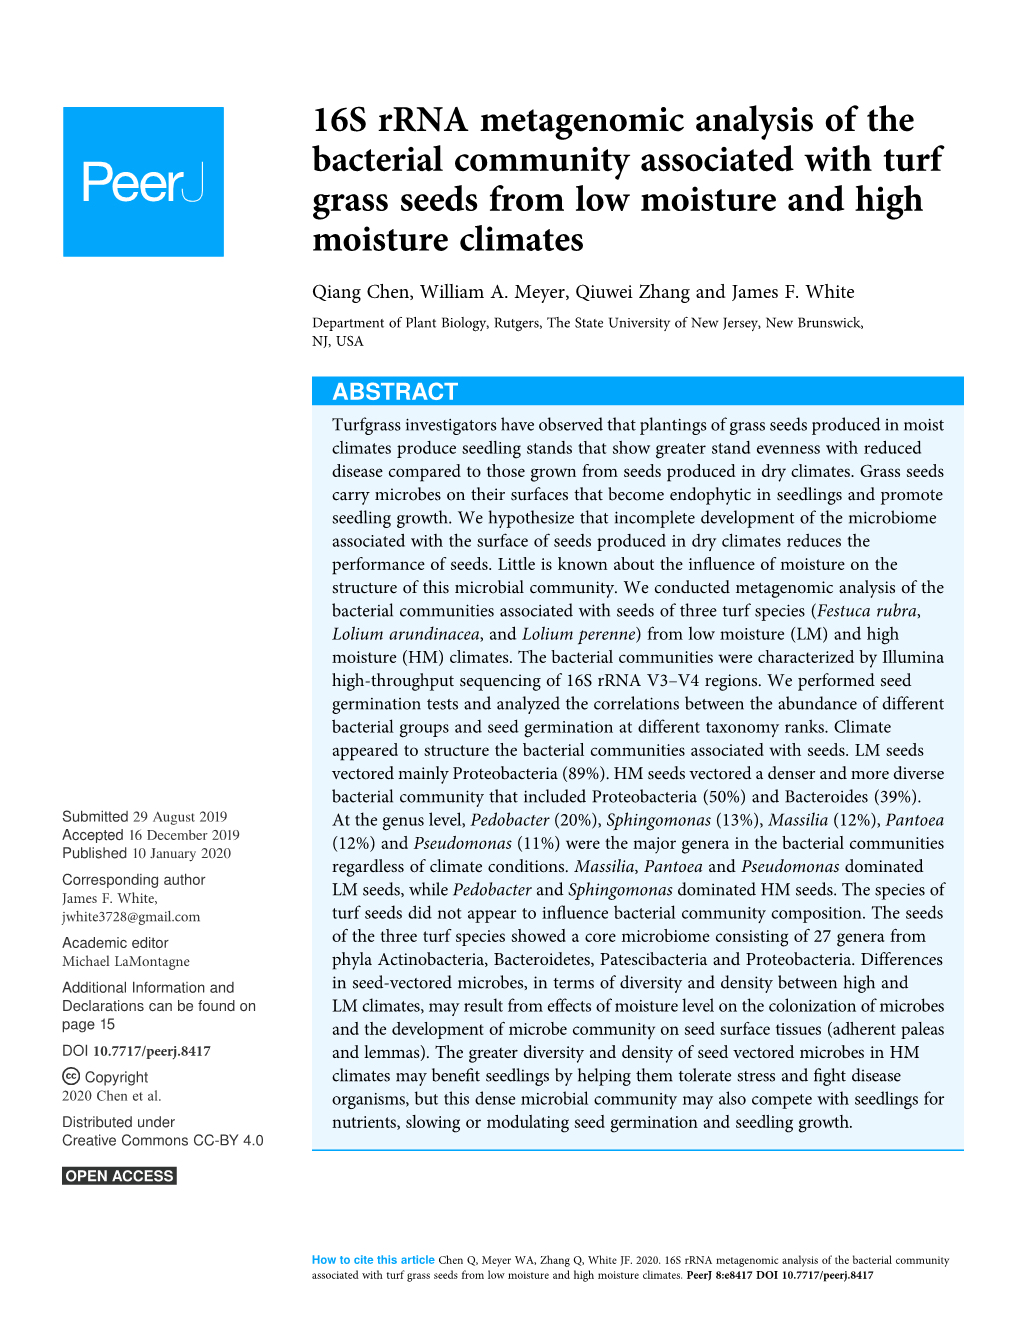 16S Rrna Metagenomic Analysis of the Bacterial Community Associated with Turf Grass Seeds from Low Moisture and High Moisture Climates